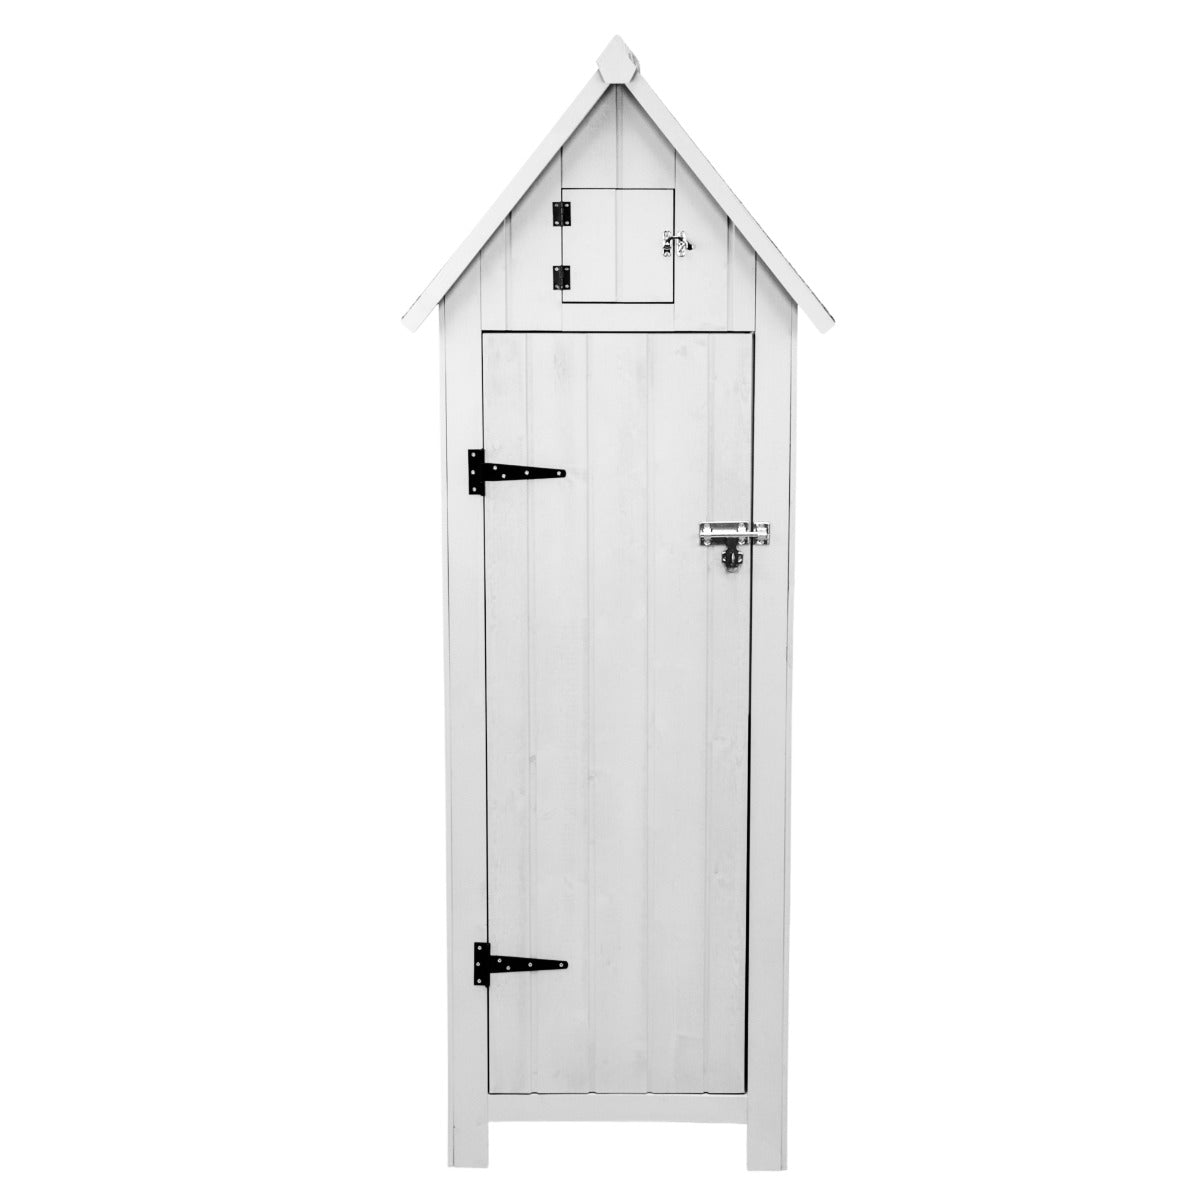 Wooden Garden Shed – White